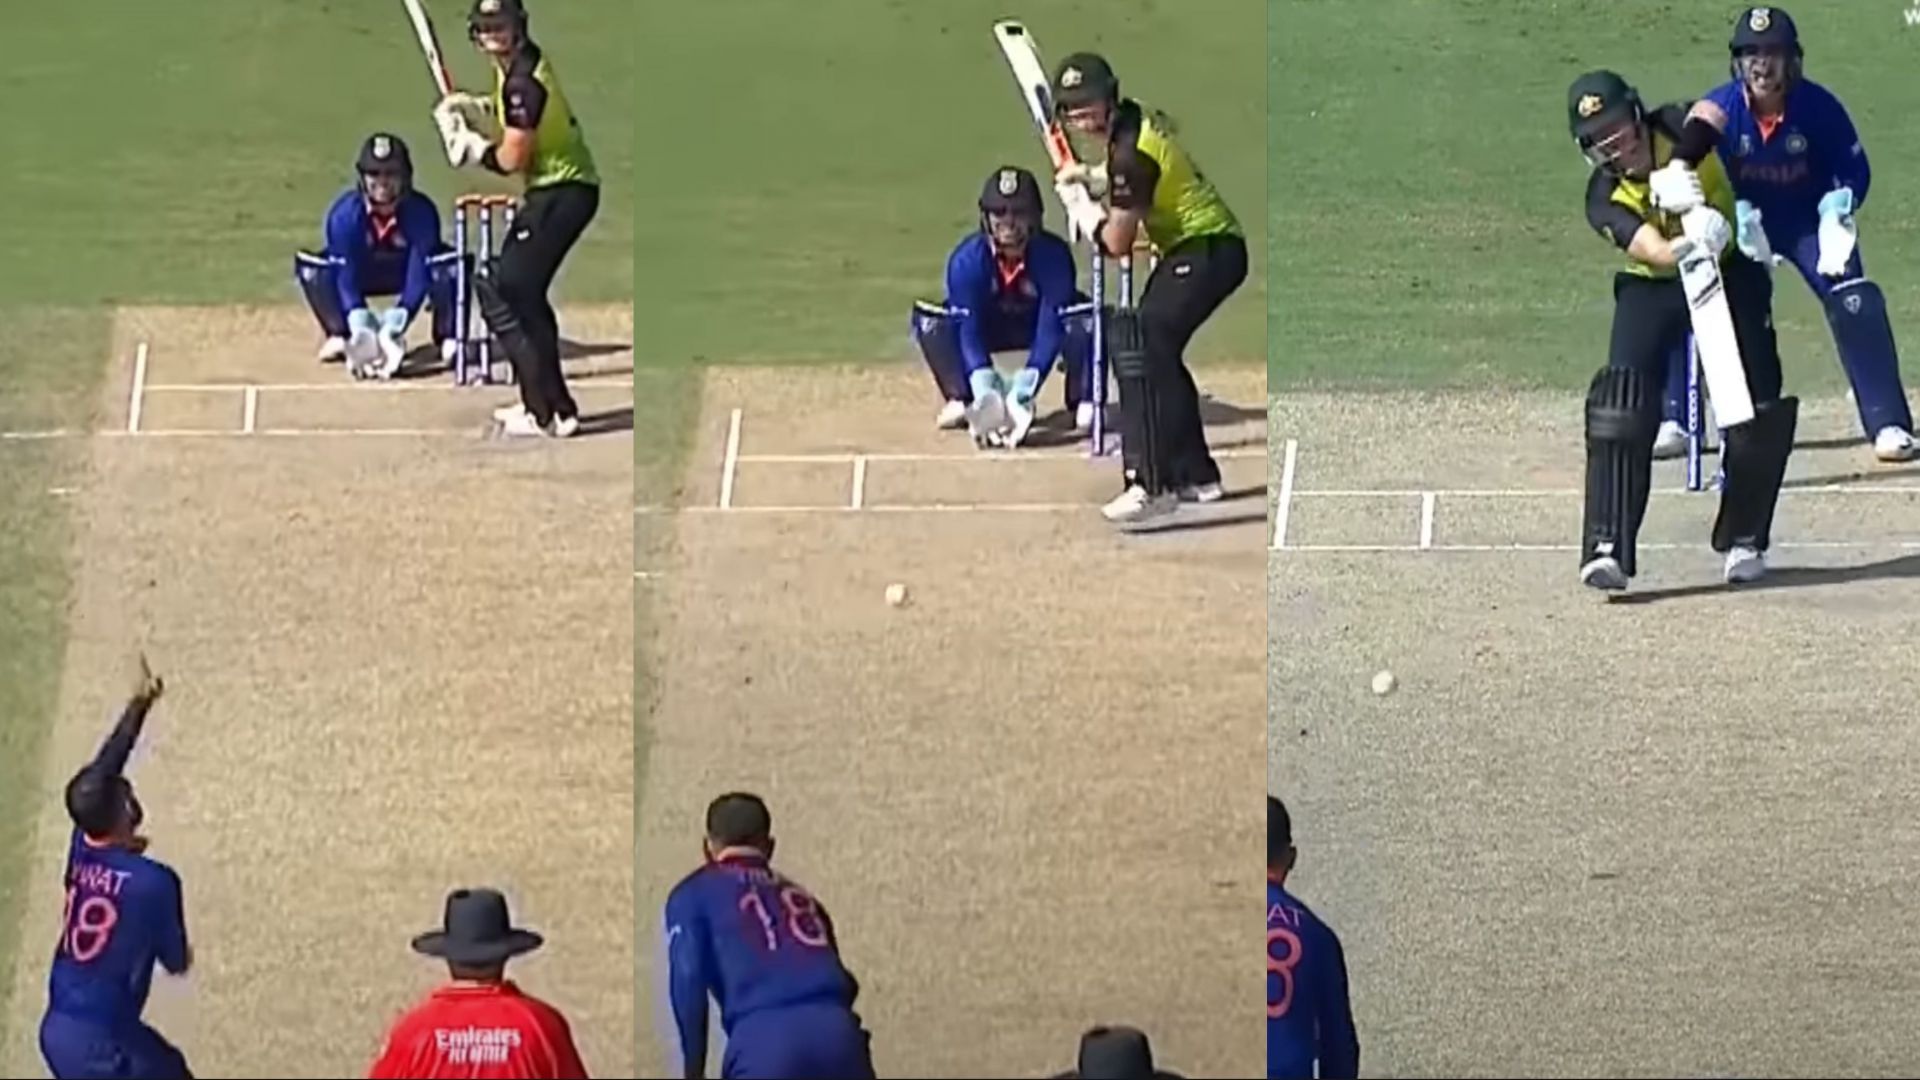 Virat Kohli bowled a couple of overs in the warm-up match against Australia